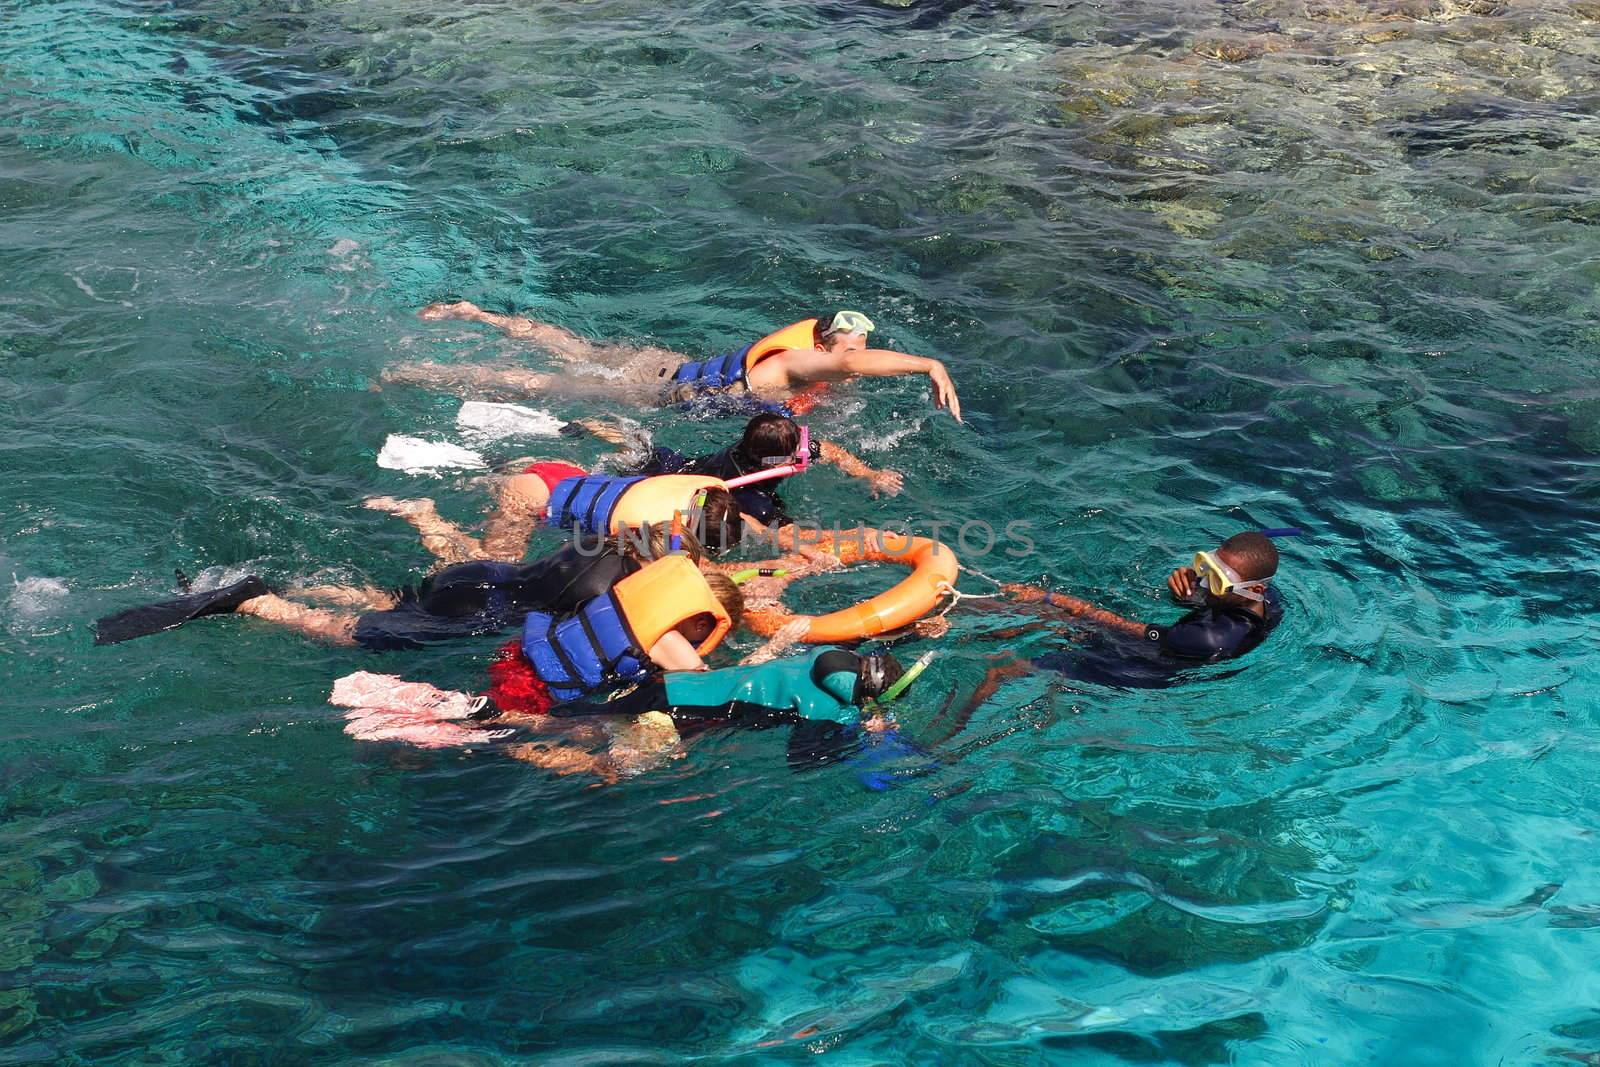 The group of people is engaged swimming in the sea with the instructor